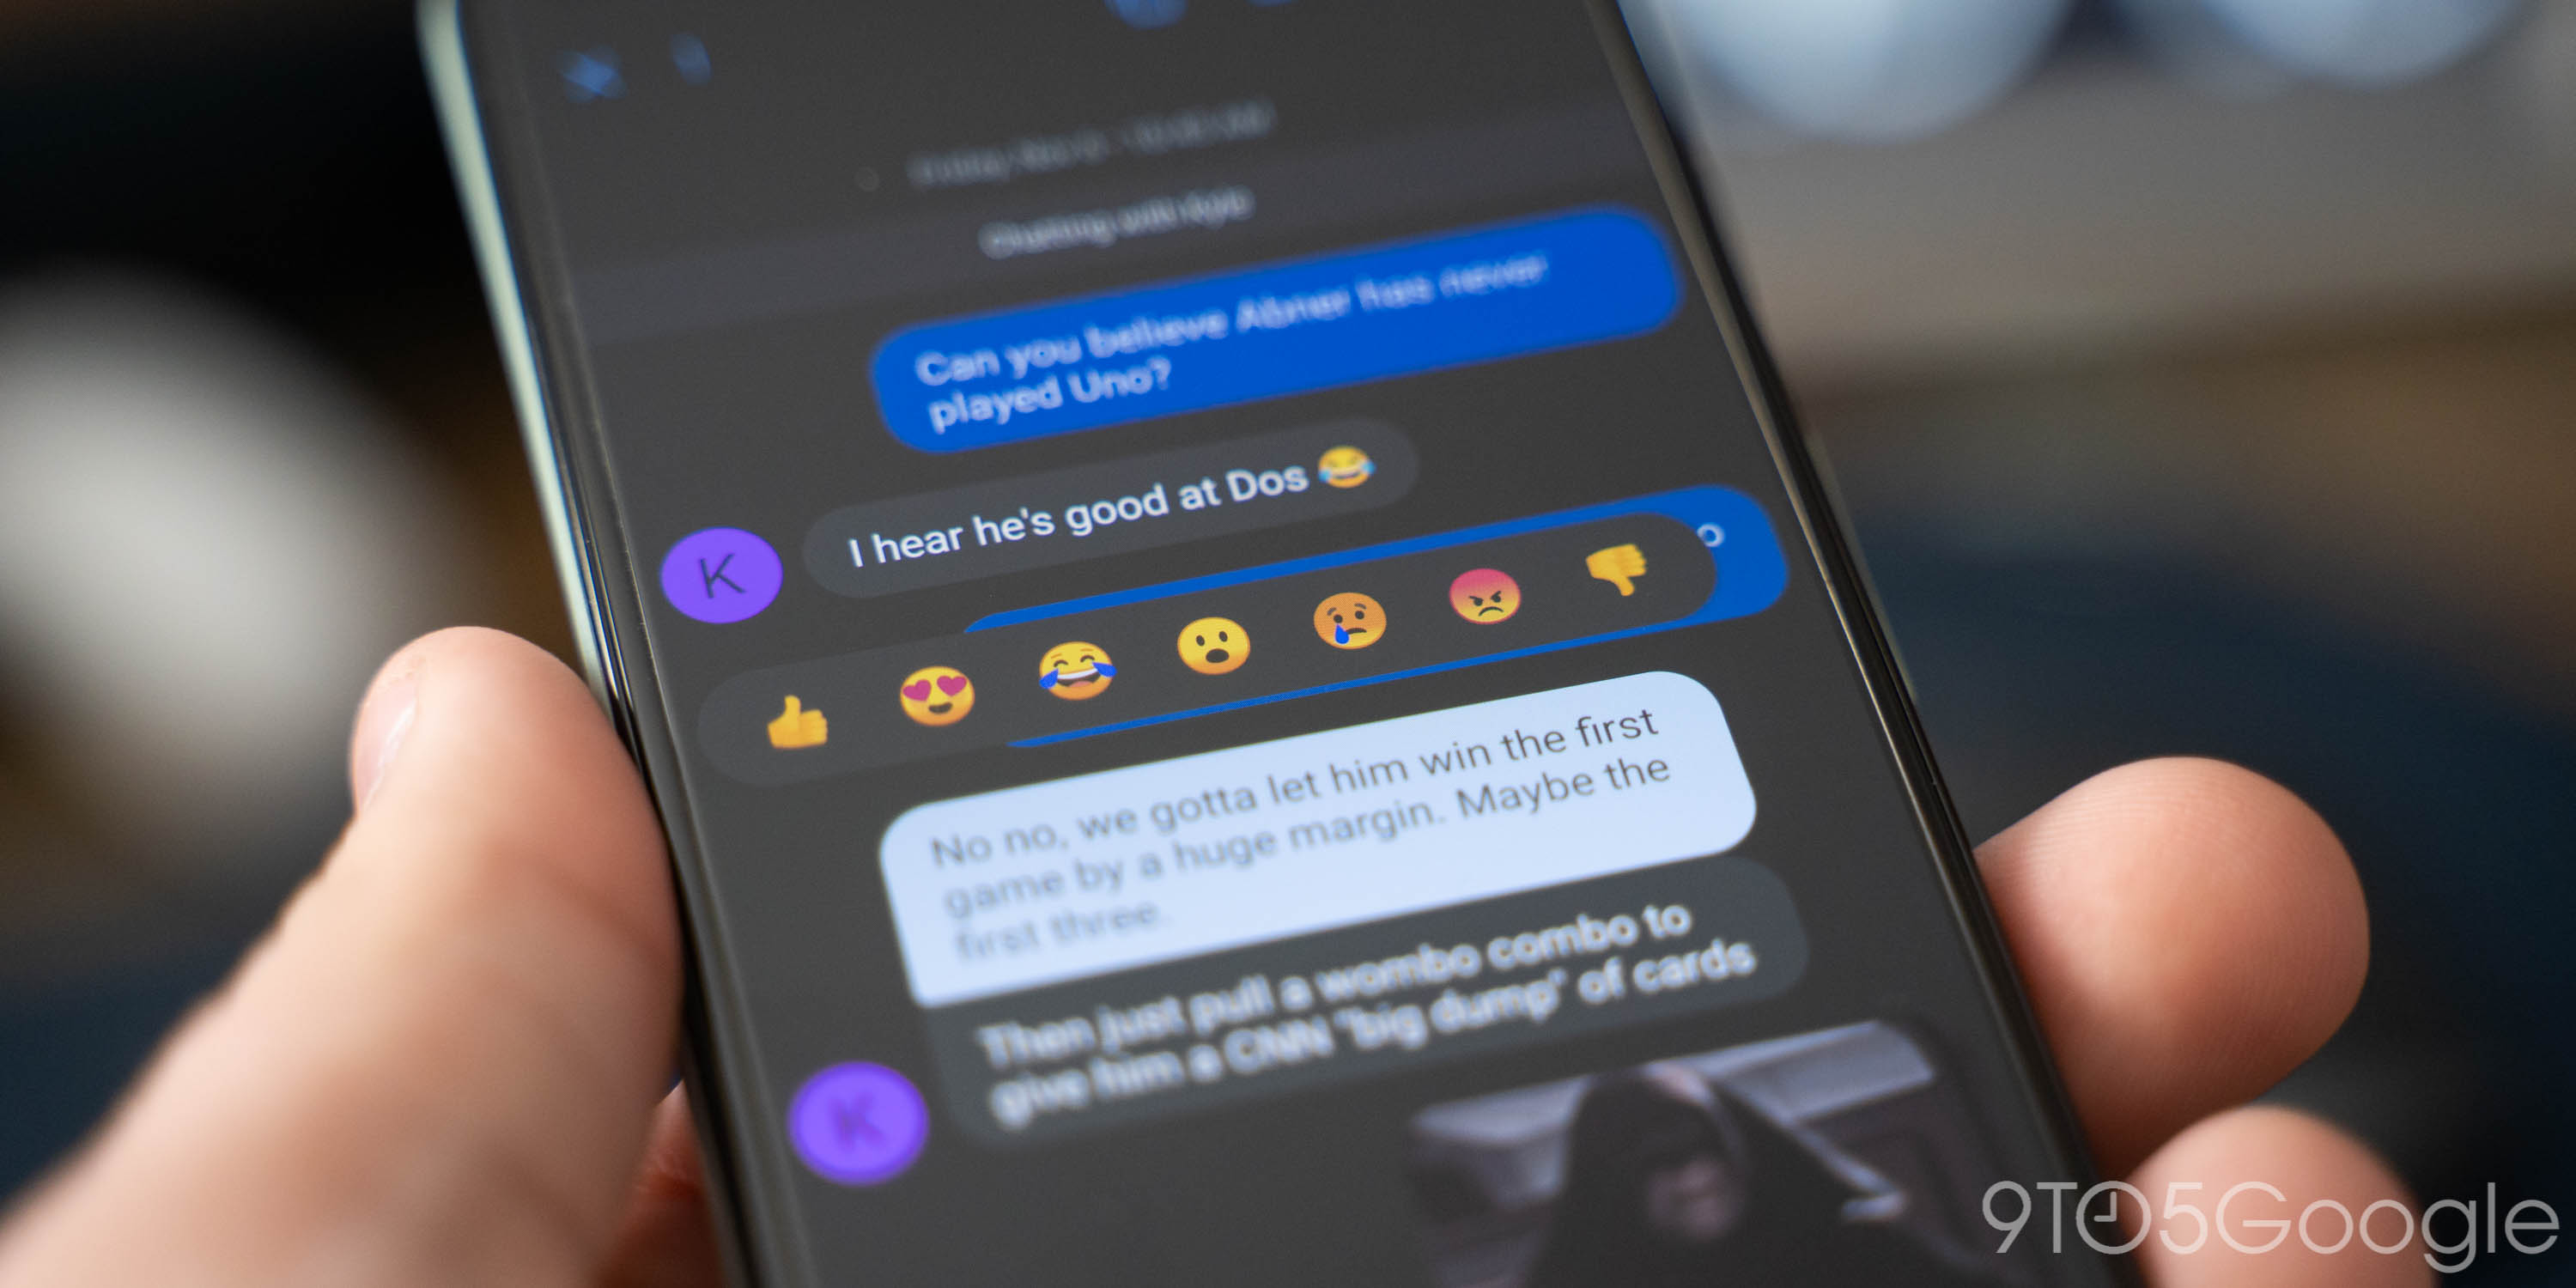 imessage for android free download